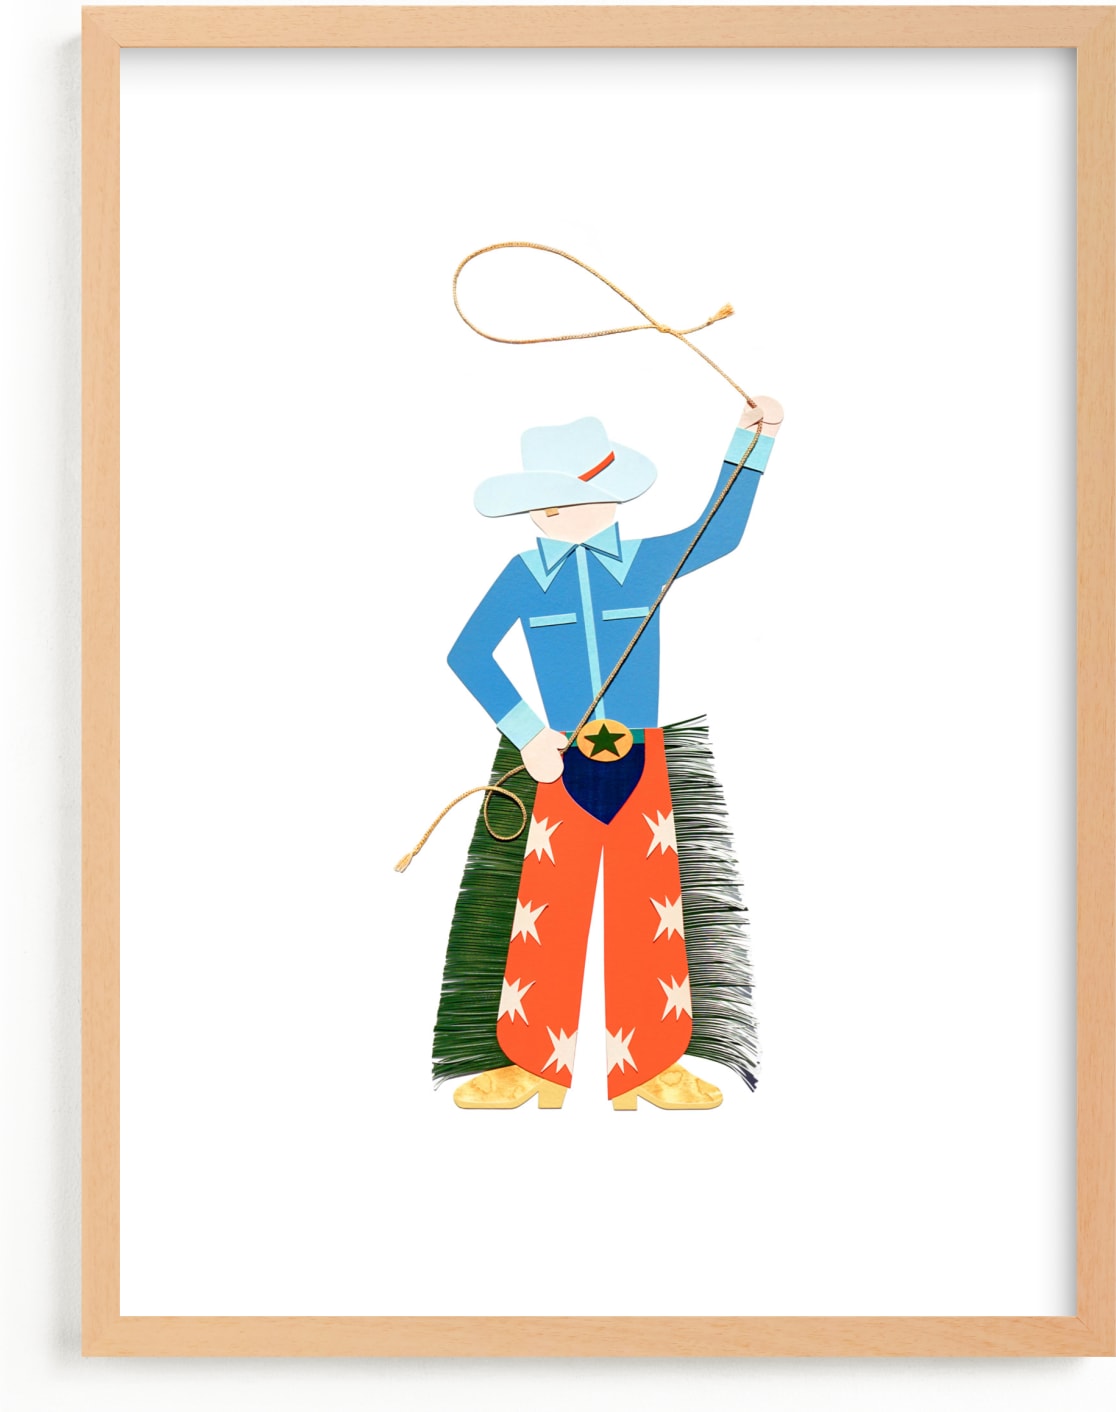 This is a blue kids wall art by Kelsey Livingston called Cowboy Carl.